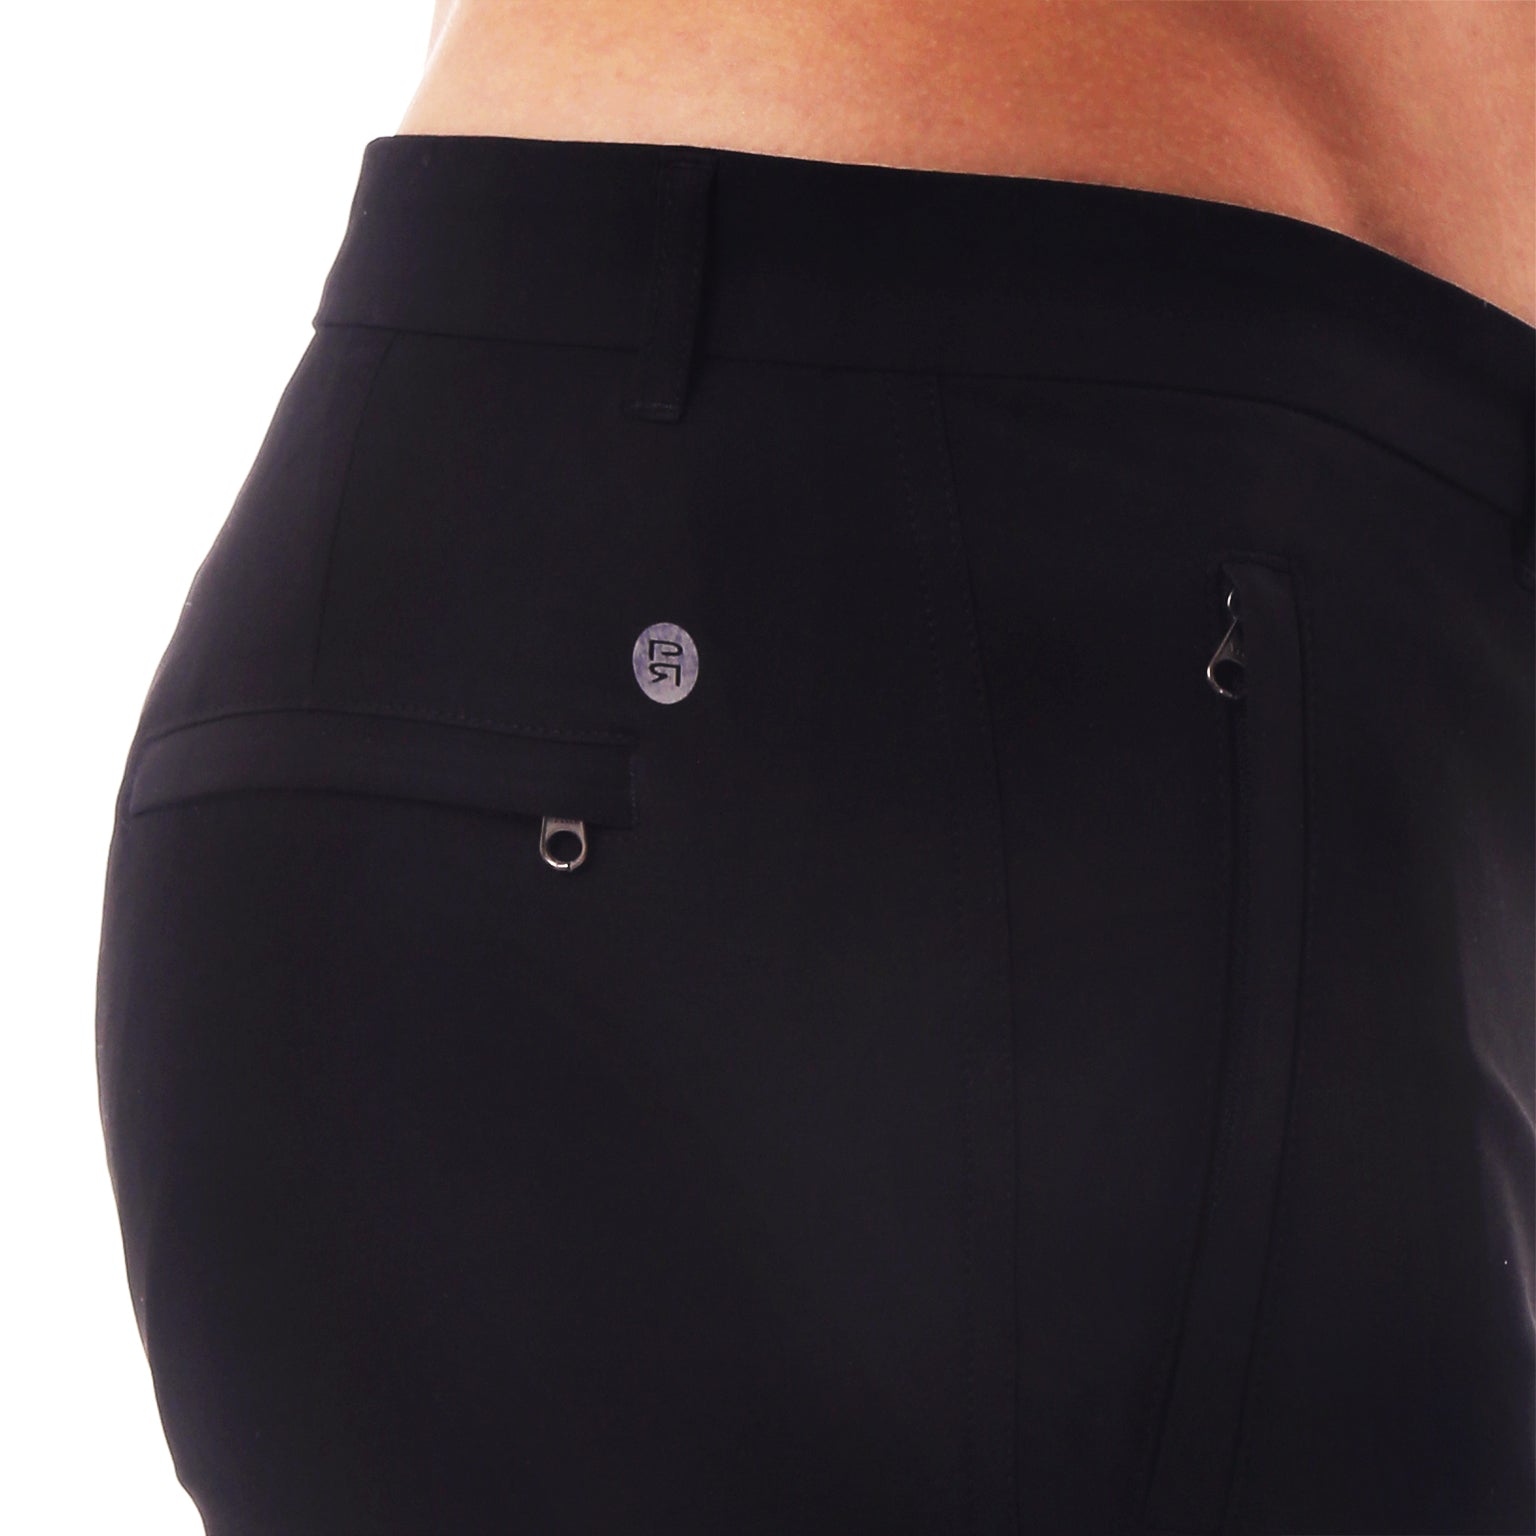 ACTIONWEAR Black Solid Action Stretch Holler Shorts